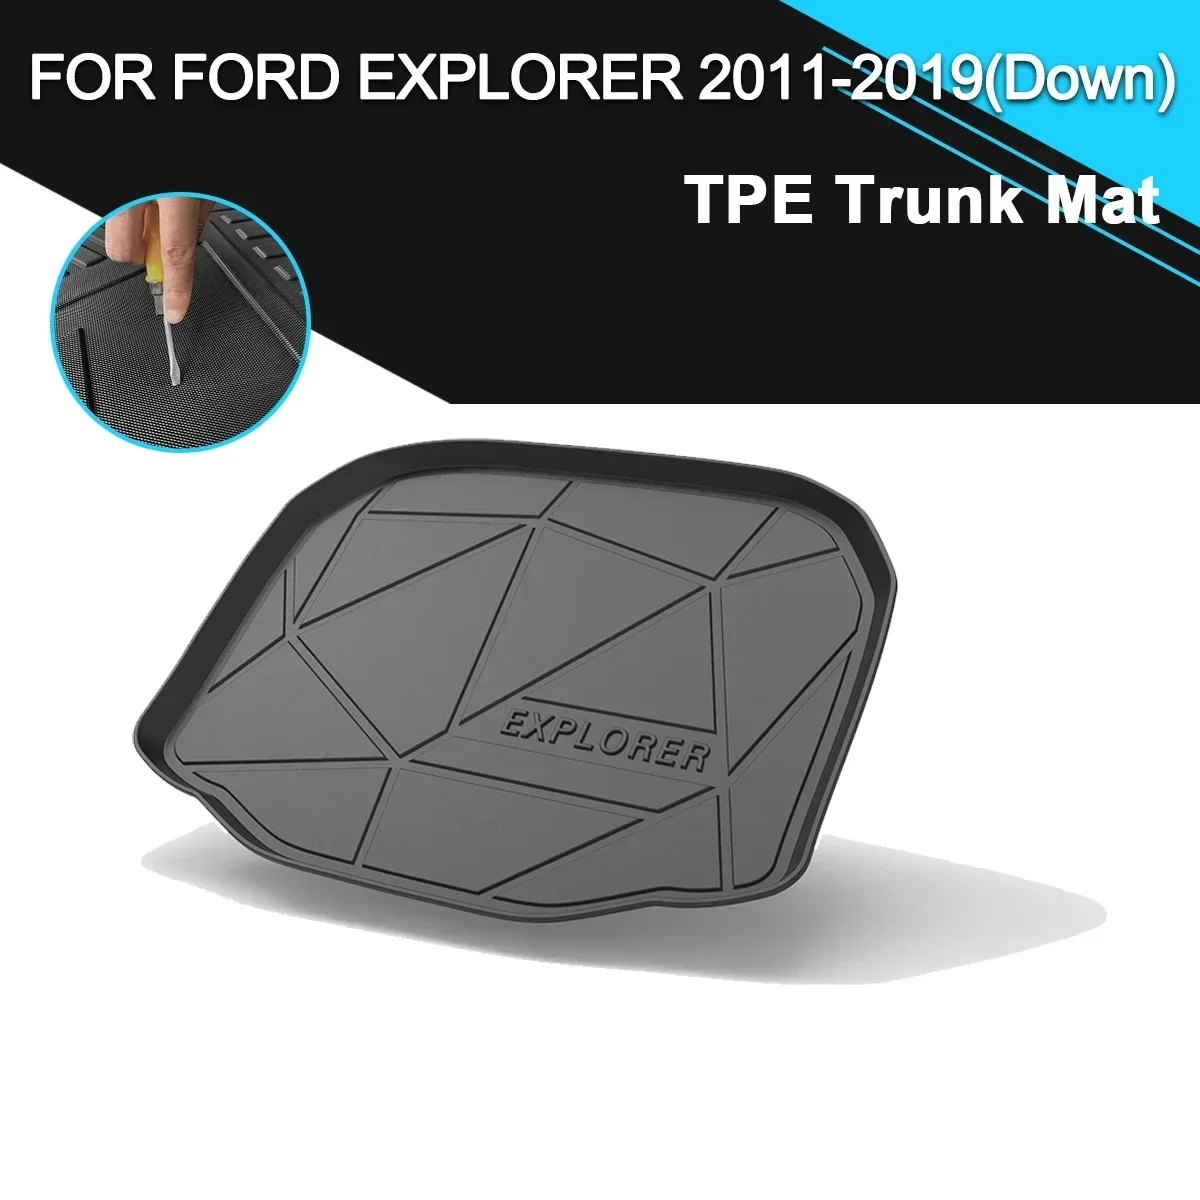 

Car Rear Trunk Cover Mat Non-Slip Waterproof Rubber TPE Cargo Liner Accessories For Ford Explorer 2011-2019(Down)